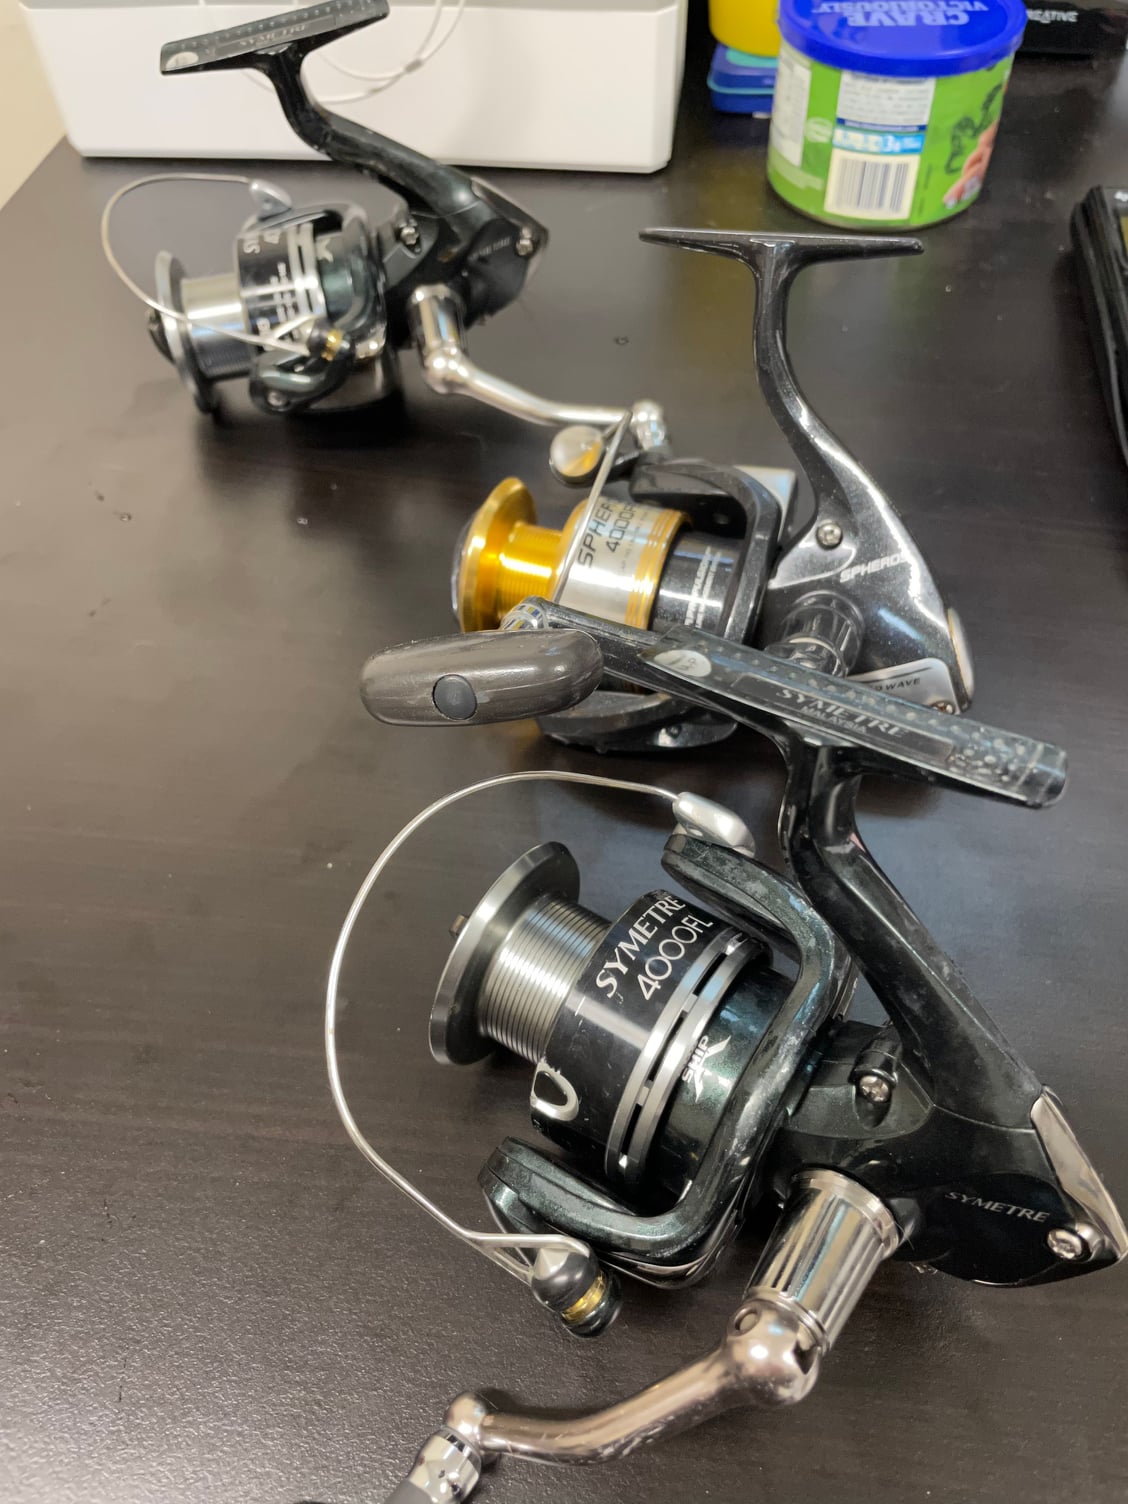 Shimano inshore reels for sale - The Hull Truth - Boating and Fishing Forum